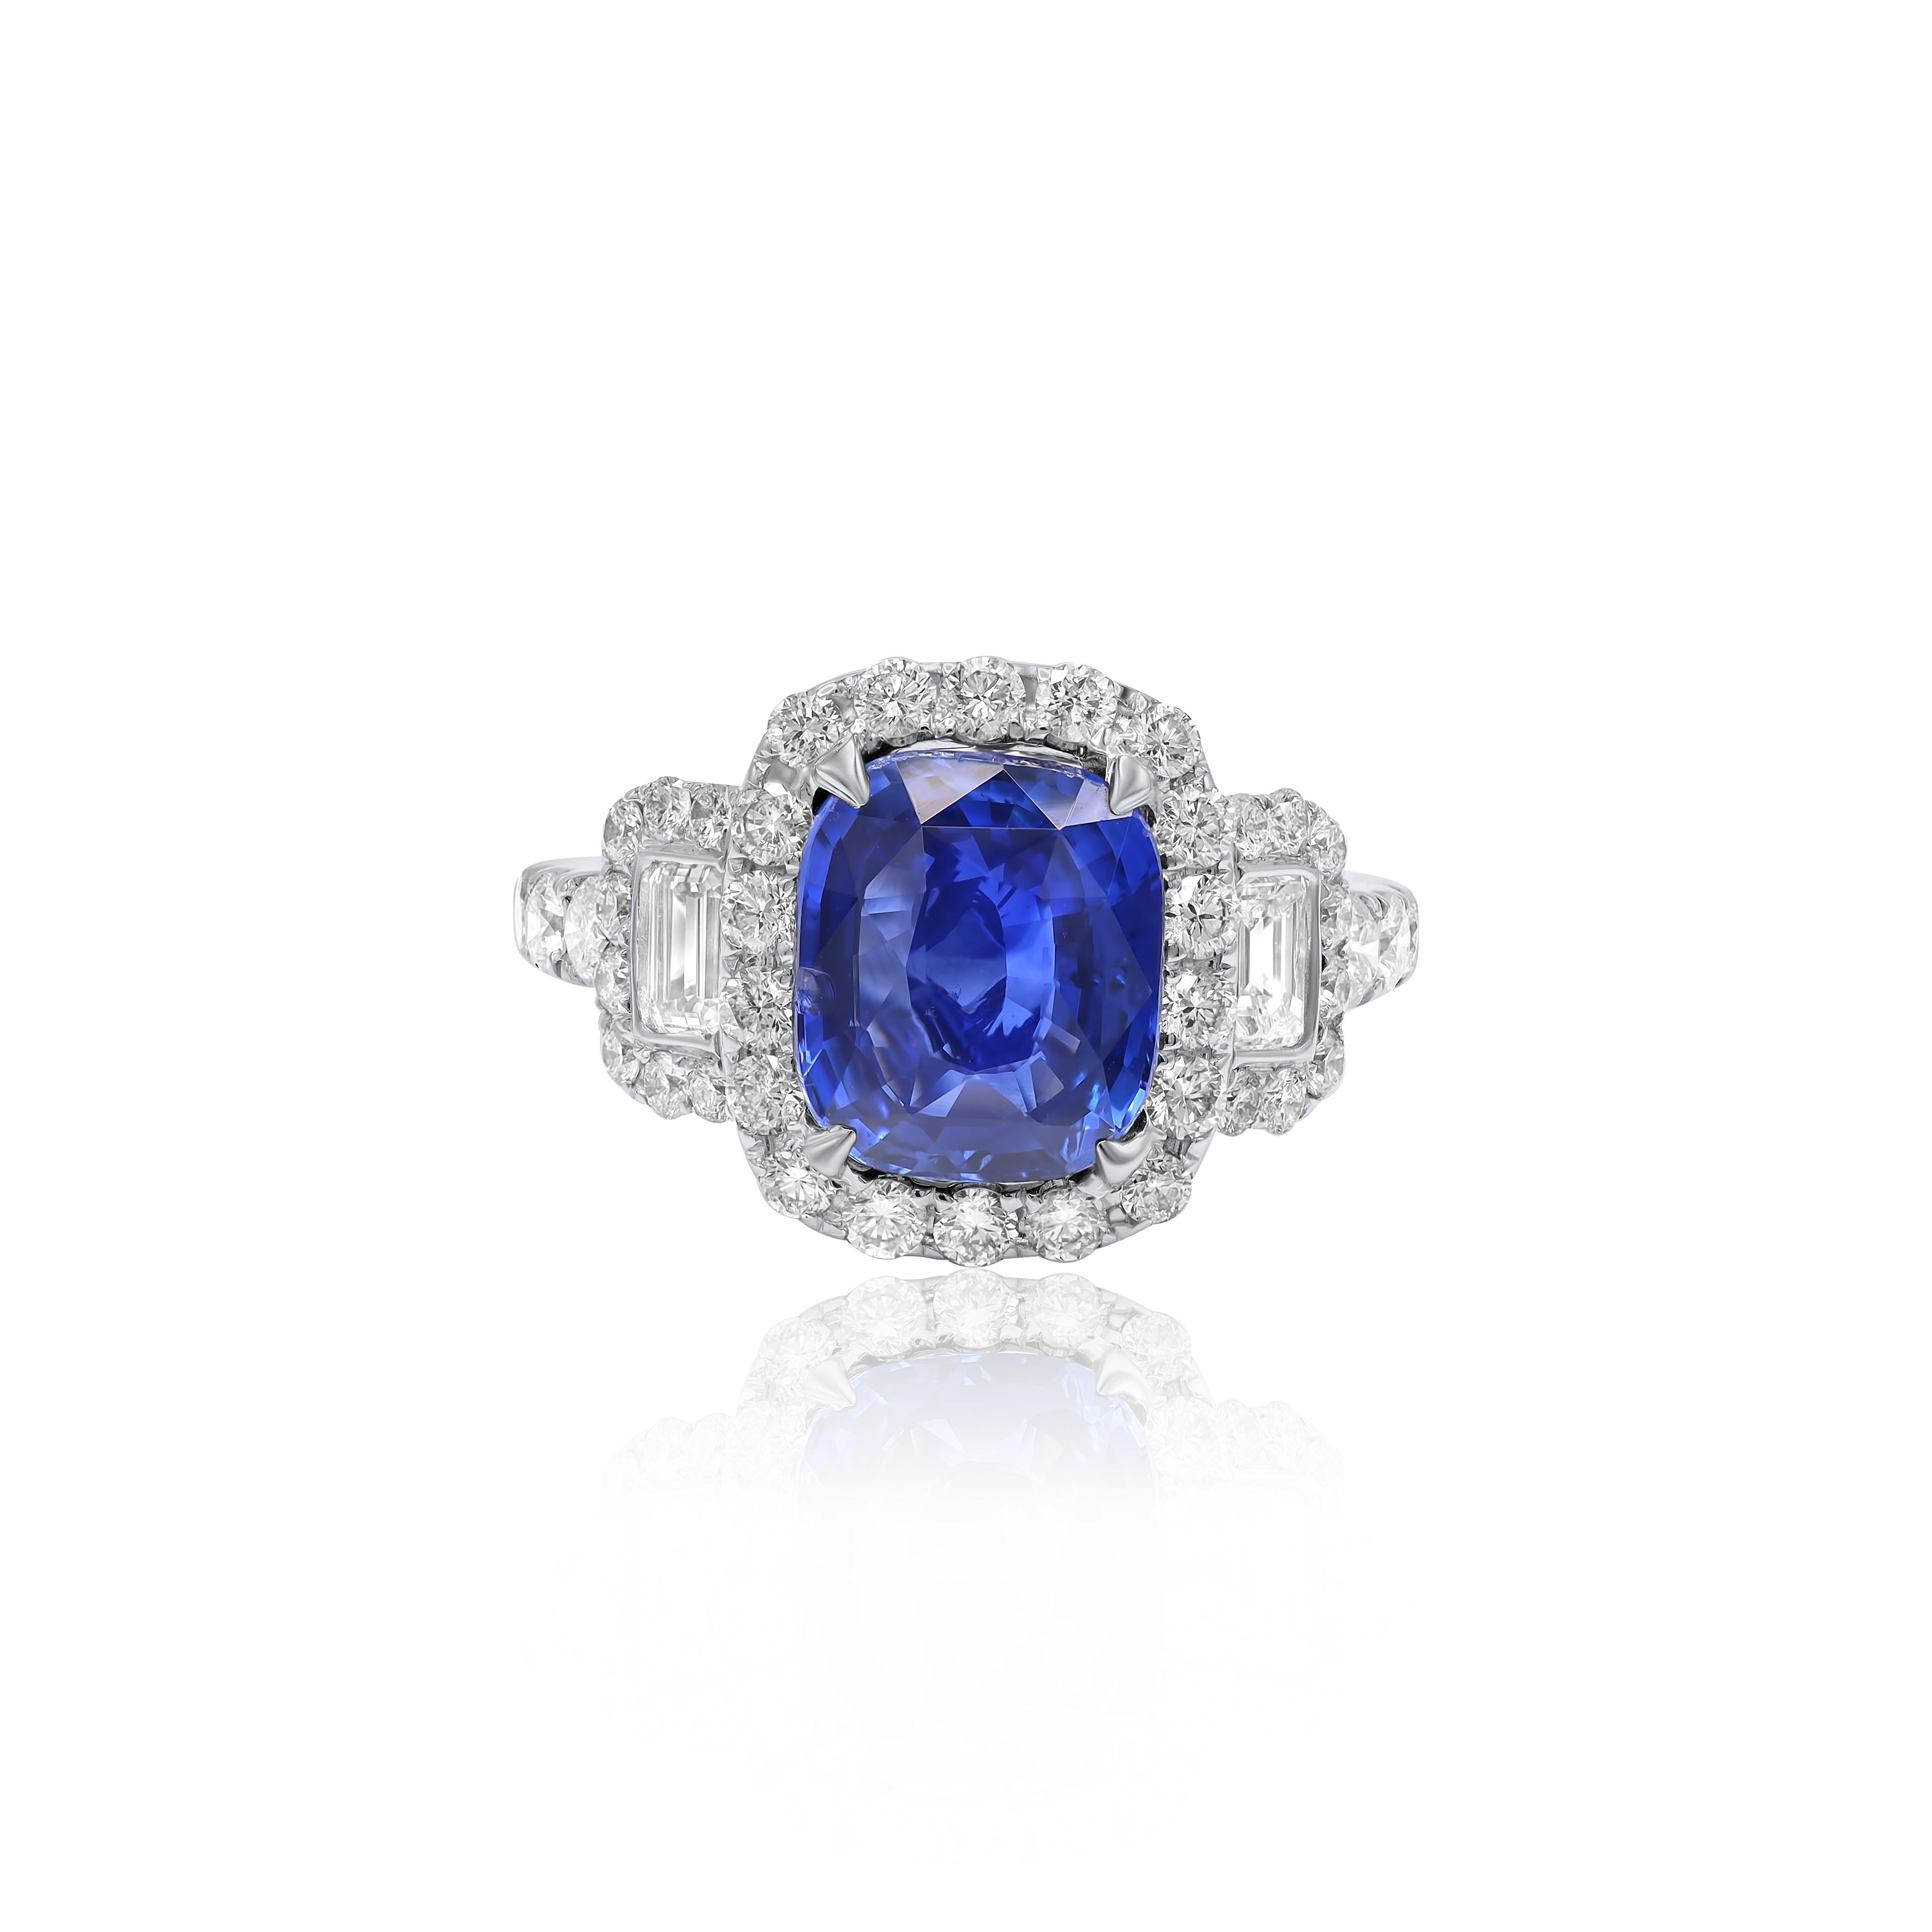 18 kt white gold sapphire diamond ring featuring a 3.58 ct heated cushion cut sapphire with 1.50 cts tw of baguette cut diamonds.
Diana M. is a leading supplier of top-quality fine jewelry for over 35 years.
Diana M is one-stop shop for all your